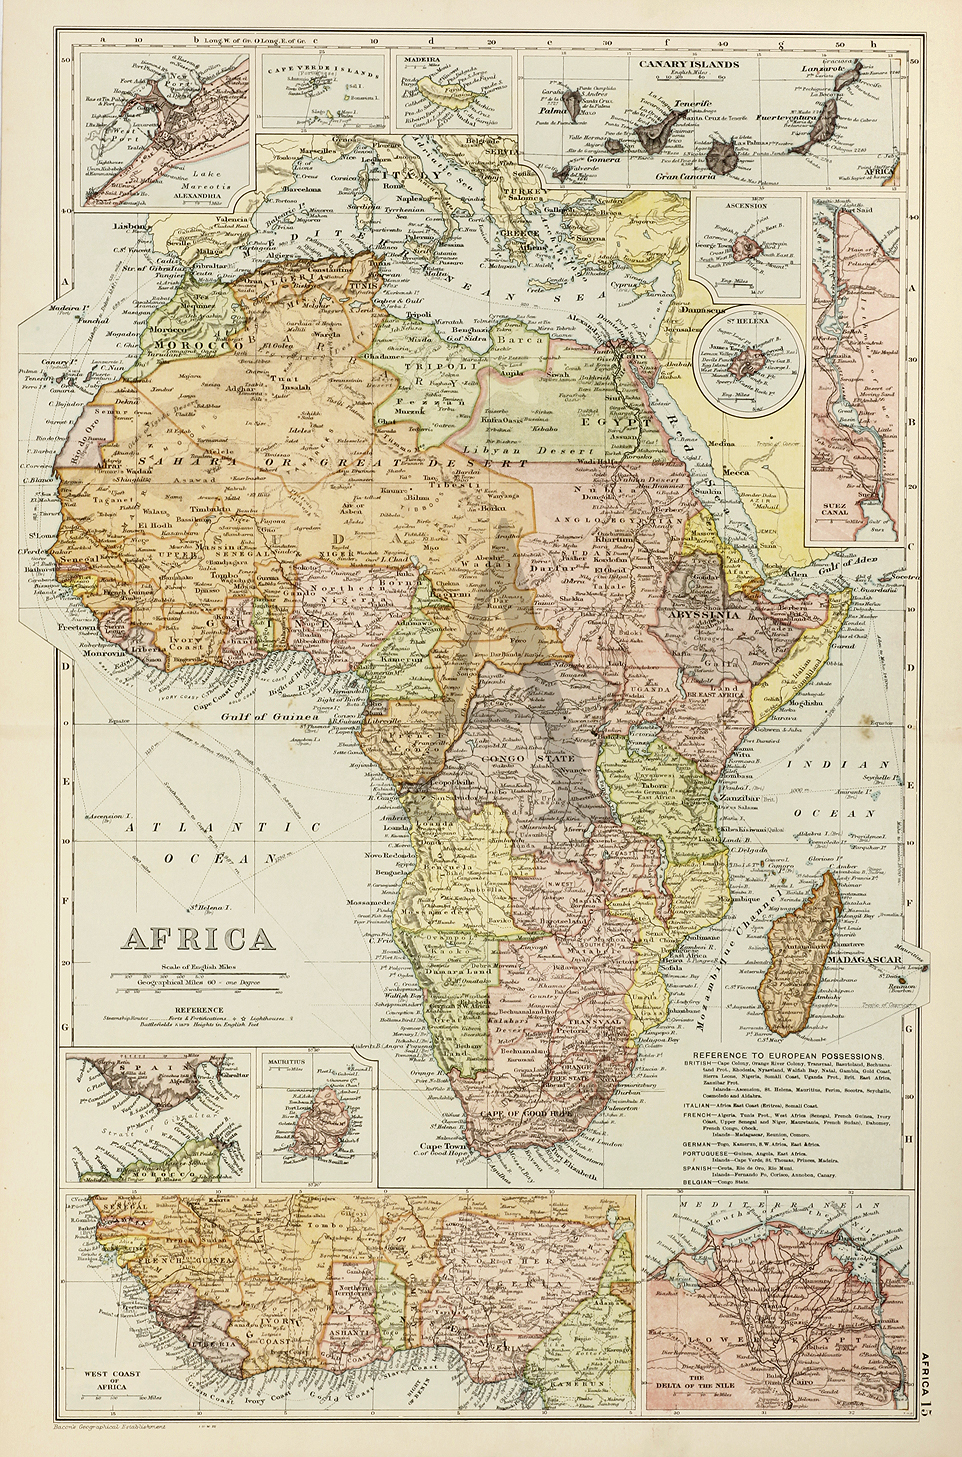 Africa - Antique Print from 1911